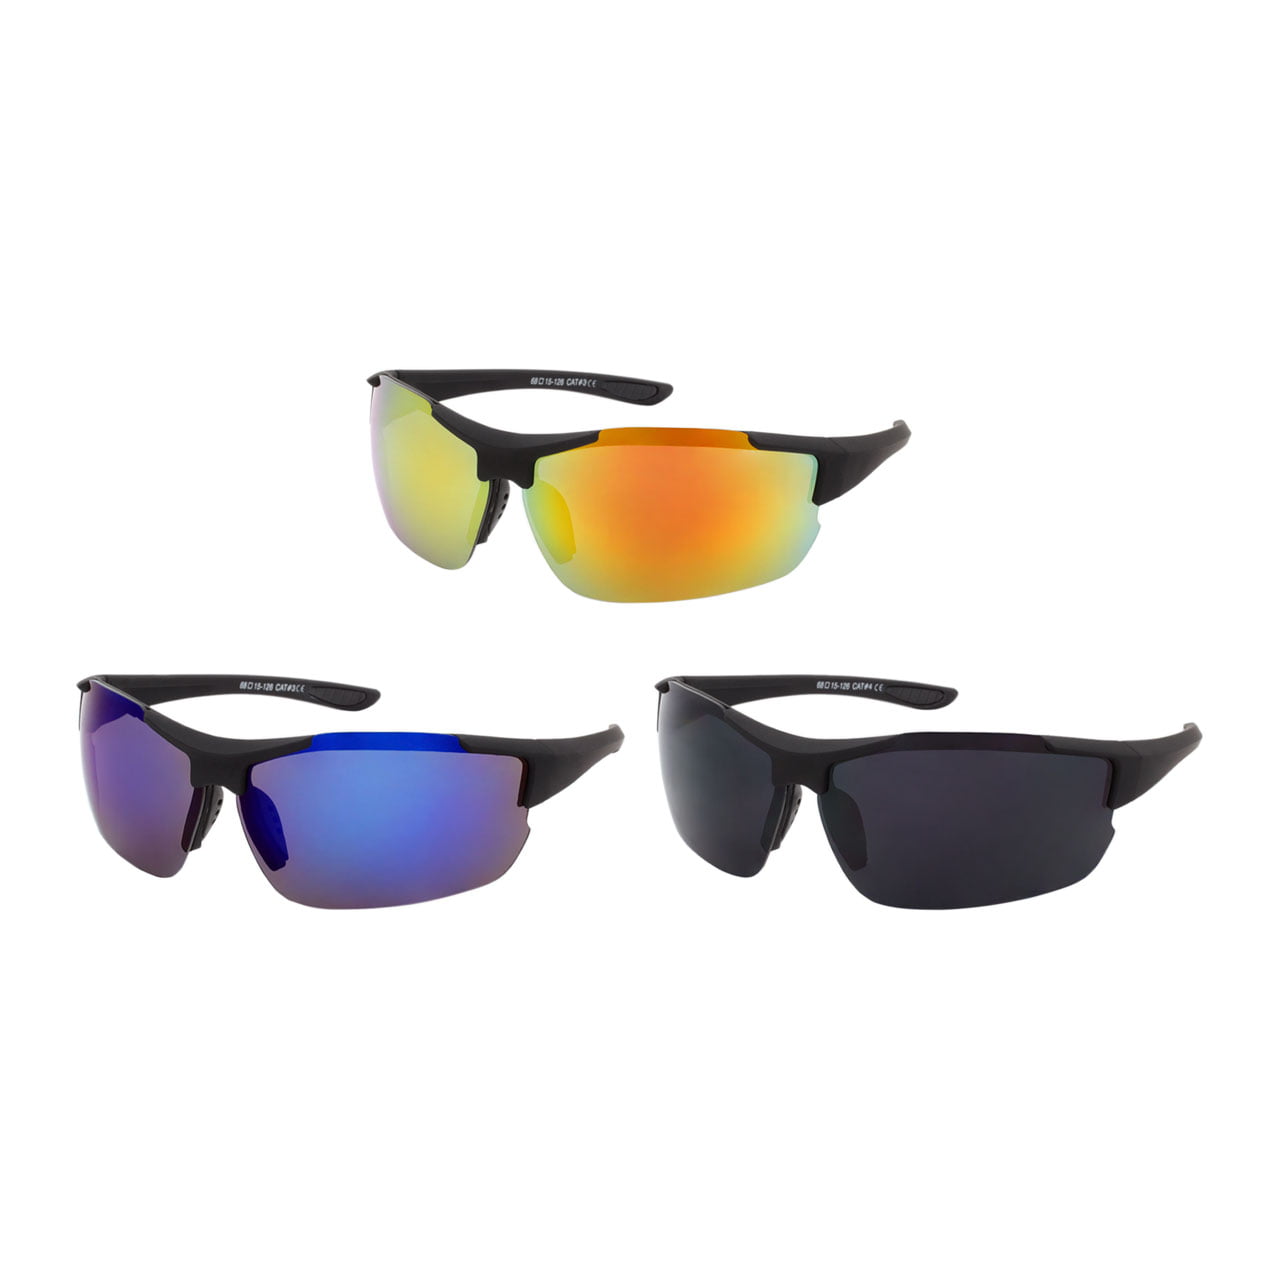 New Sports Sunglasses Men's Polarized Colorful Film Series Glasses Dust-proof Mirror Cycling Mirror Sunglasses with Glasses Case,Sun Glasses